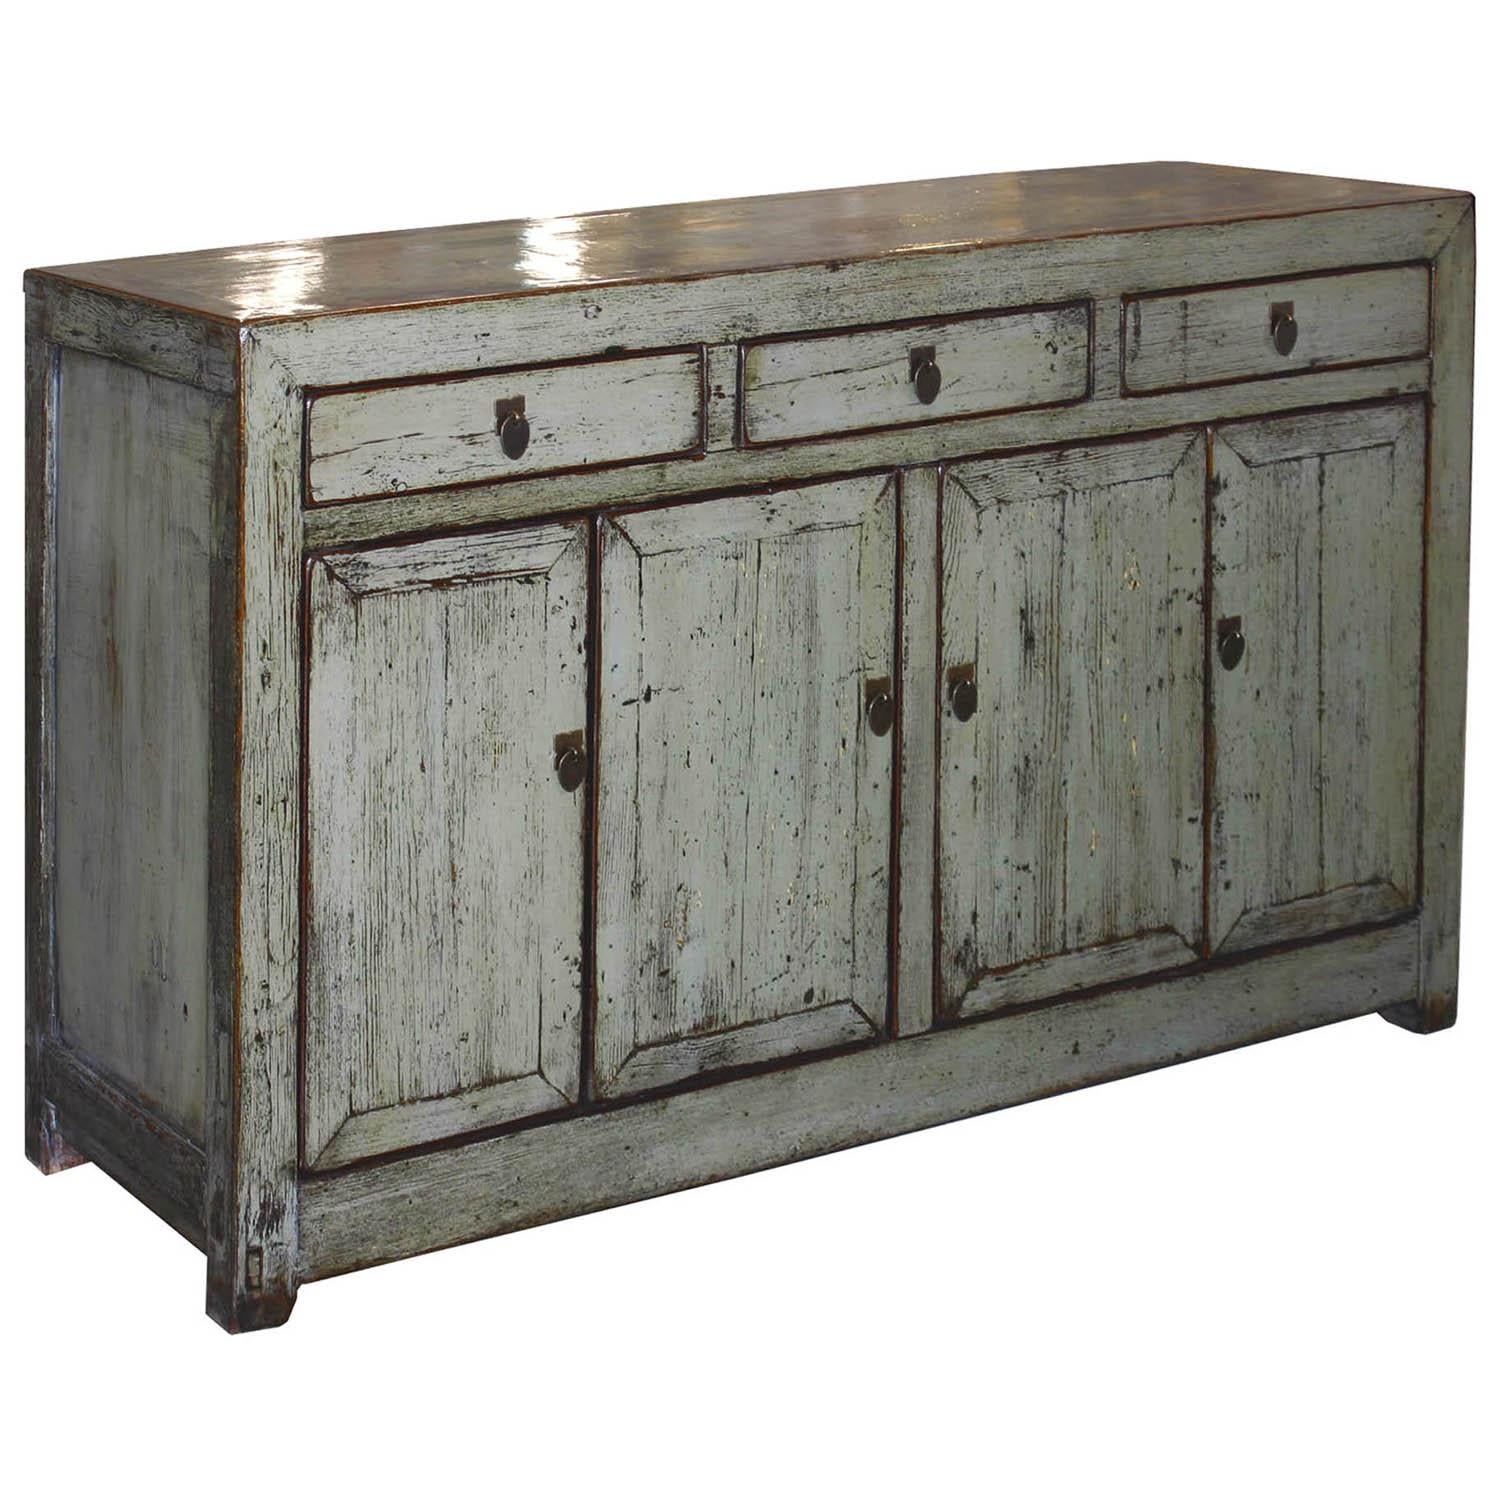 Elegant gray lacquer Dongbei buffet with 4-drawer, clean lines, exposed wood edges looks great in the living beneath a flat screen TV top or in the dining room as a server. New interior shelf and hardware.